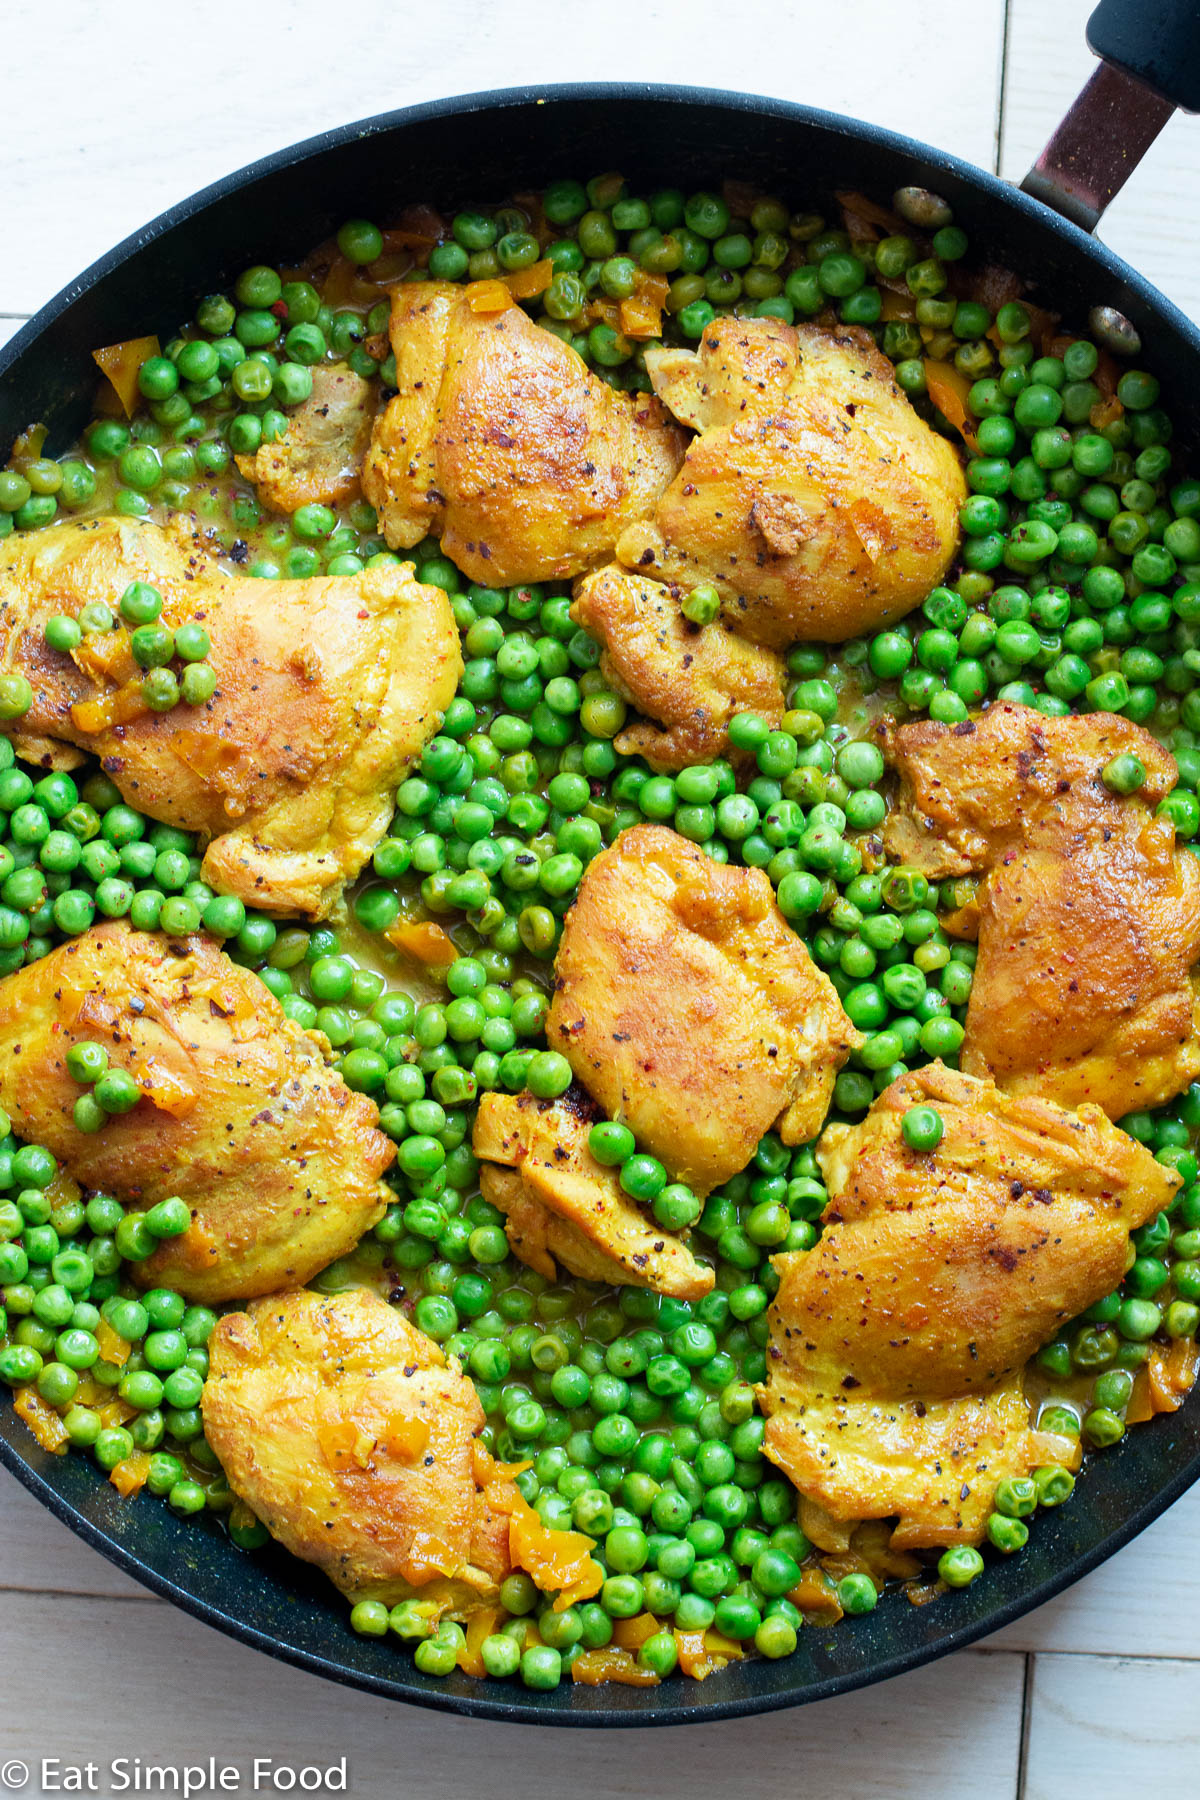 Top view of browned boneless skinless chicken thighs on a bed of vibrant green peas in a black skillet.